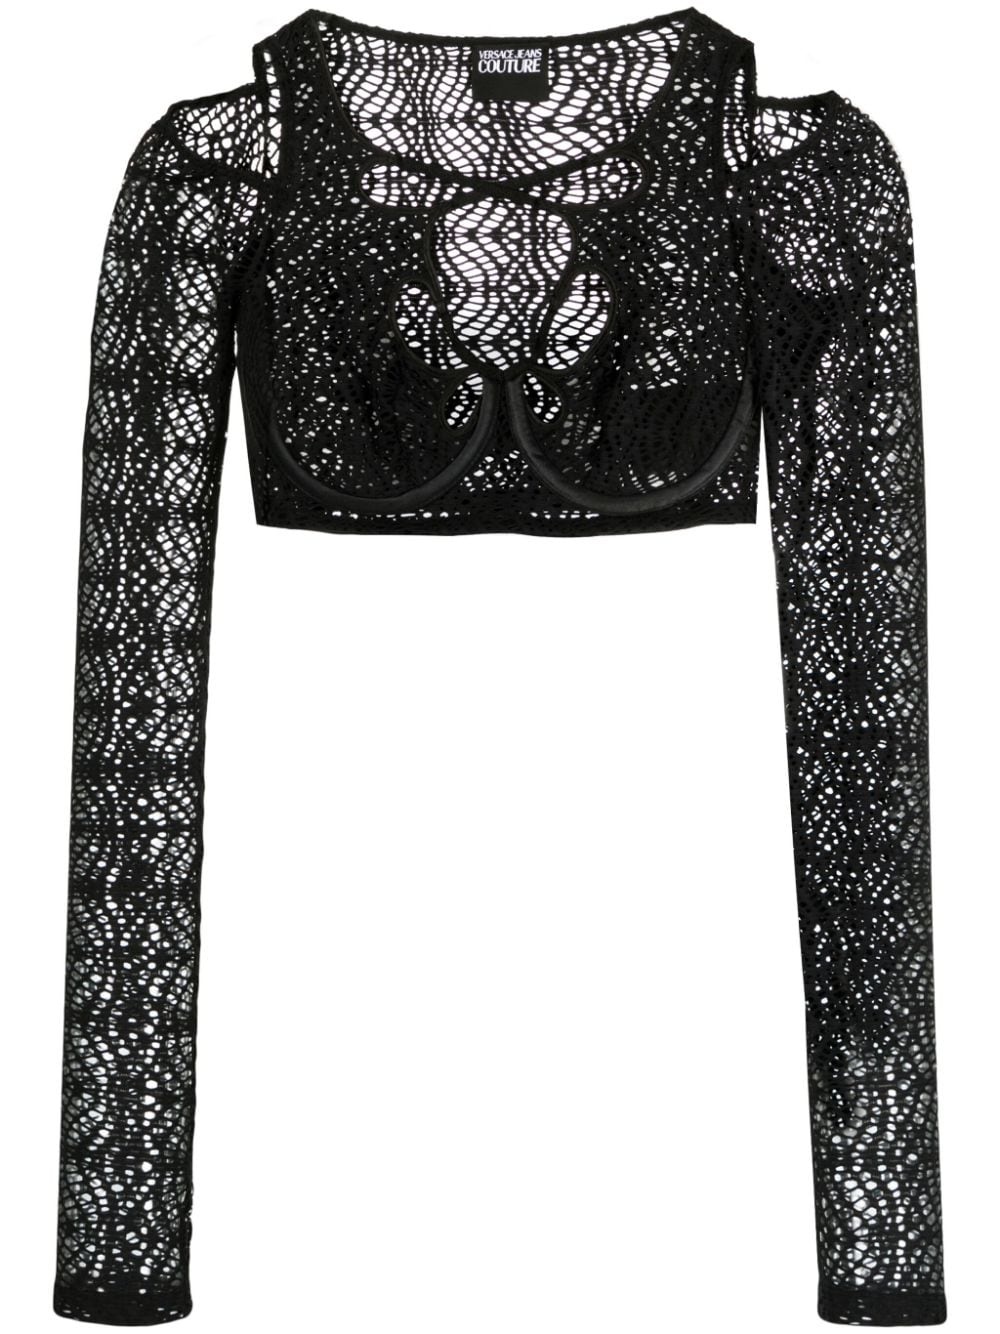 mesh-lace cropped top - 1